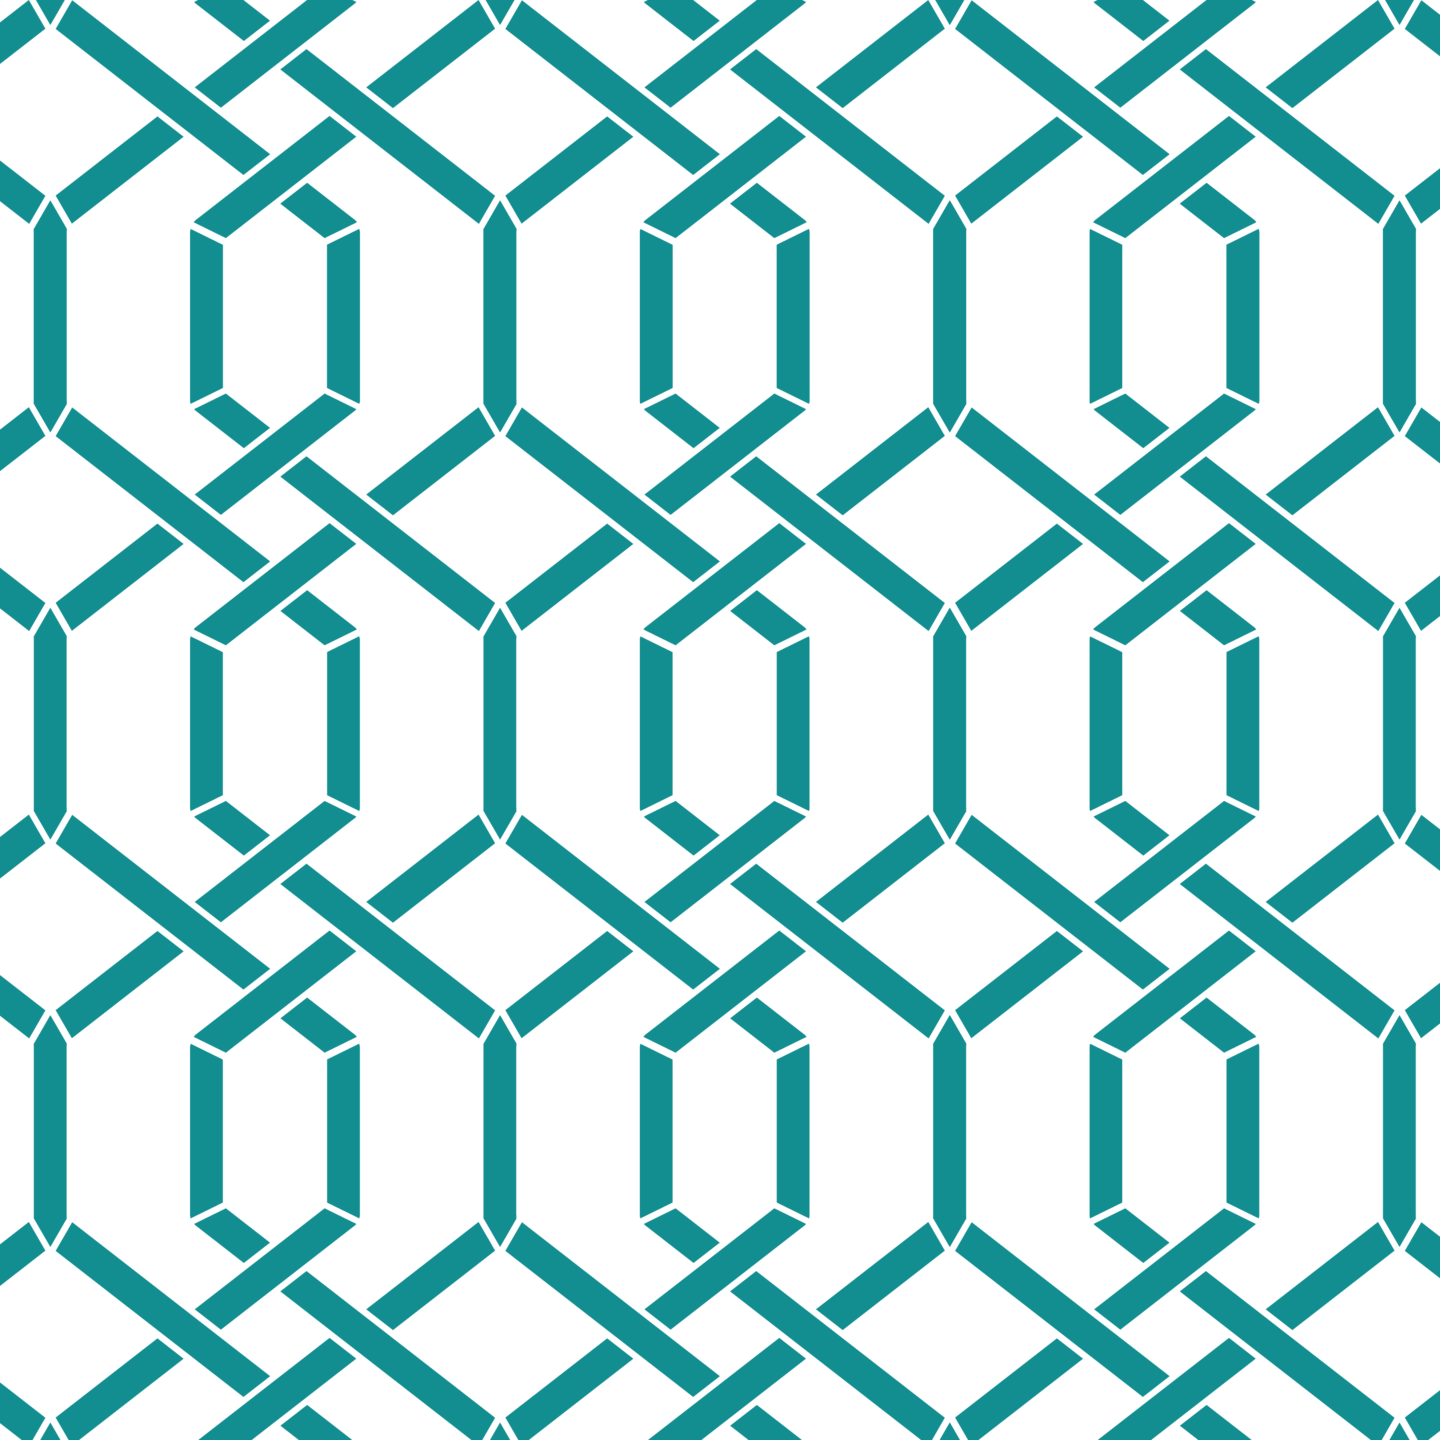 Moorish Lattice Wall Stencil | 3729 by Designer Stencils | Pattern Stencils | Reusable Stencils for Painting | Safe &#x26; Reusable Template for Wall Decor | Try This Stencil Instead of a Wallpaper | Easy to Use &#x26; Clean Art Stencil Pattern